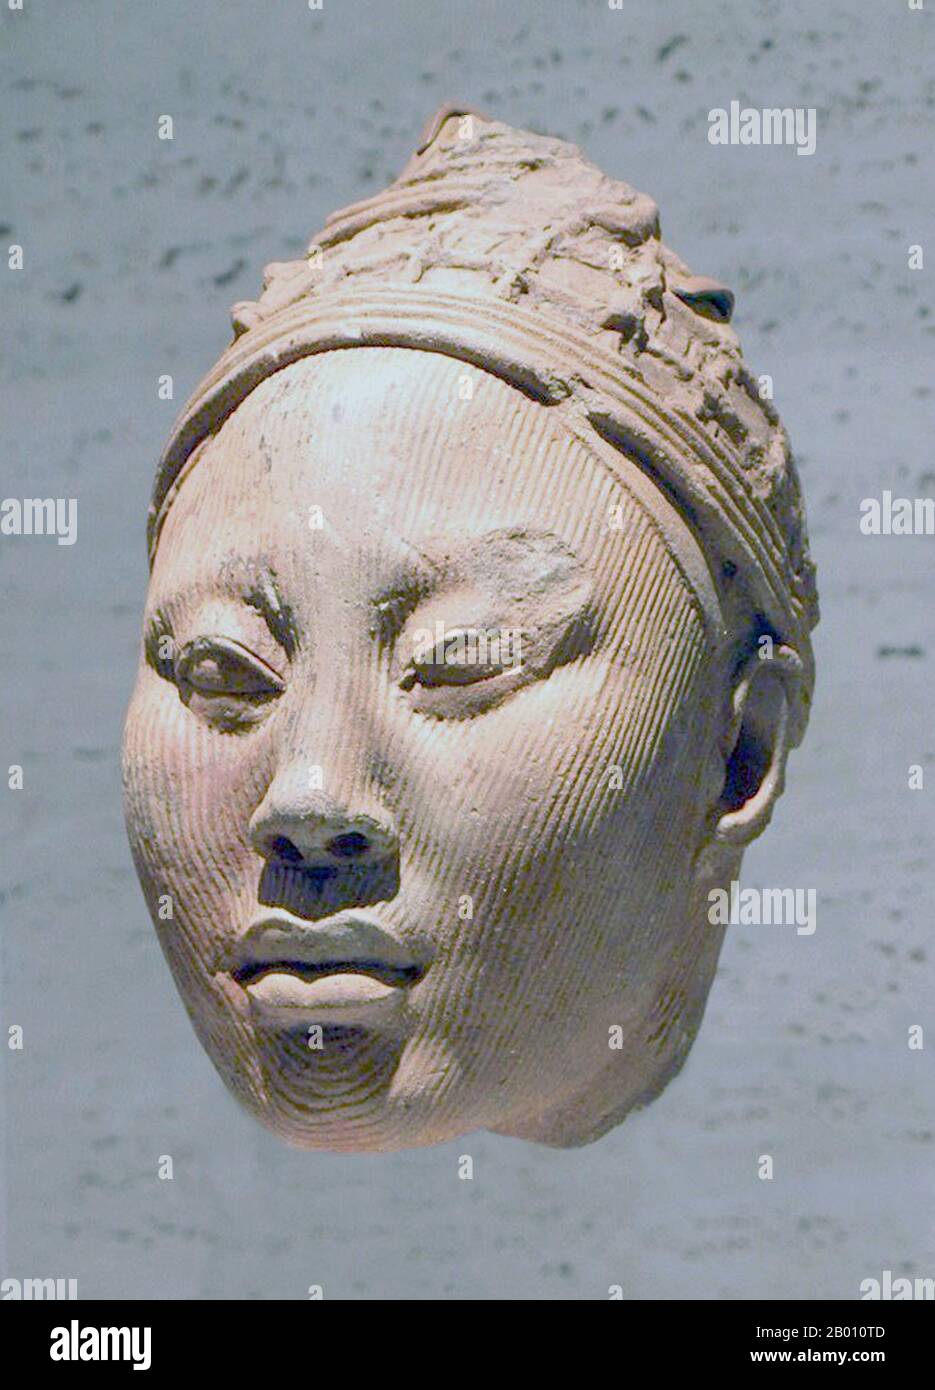 Nigeria: Terracotta head of a crowned Yoruba queen from the Kingdom of Ife.  Between 700 and 900 CE, the Ife Kingdom developed as a major artistic center. The city was a settlement of substantial size between the 9th and 12th centuries, with houses featuring potsherd pavements. Ife is known worldwide for its ancient and naturalistic bronze, stone and terracotta sculptures, which reached their peak of artistic expression between 1200 and 1400 A.D. After this period, production declined as political and economic power shifted to the nearby kingdom of Benin which, like the Yoruba kingdom of Oyo, Stock Photo